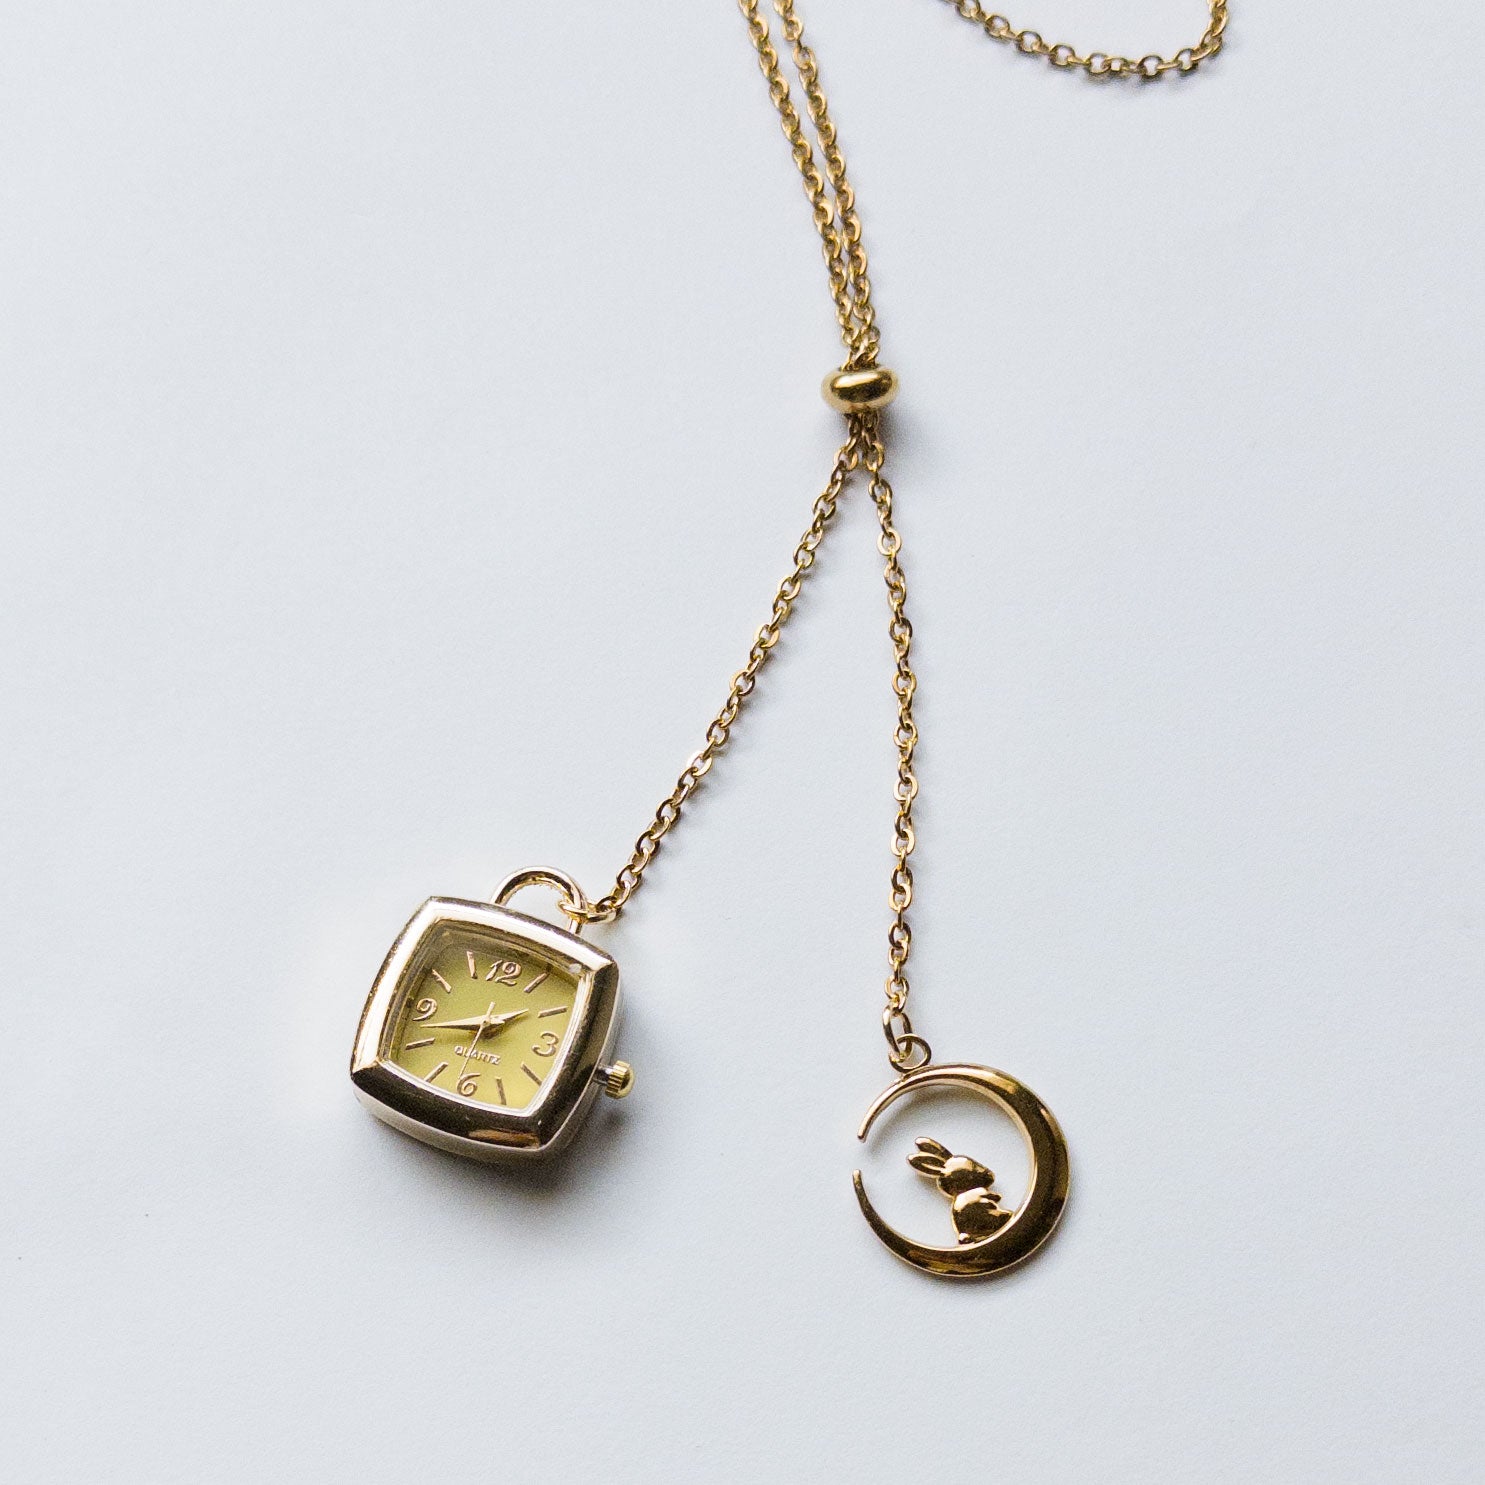 gold lariat sliding necklace with watch and moon charm